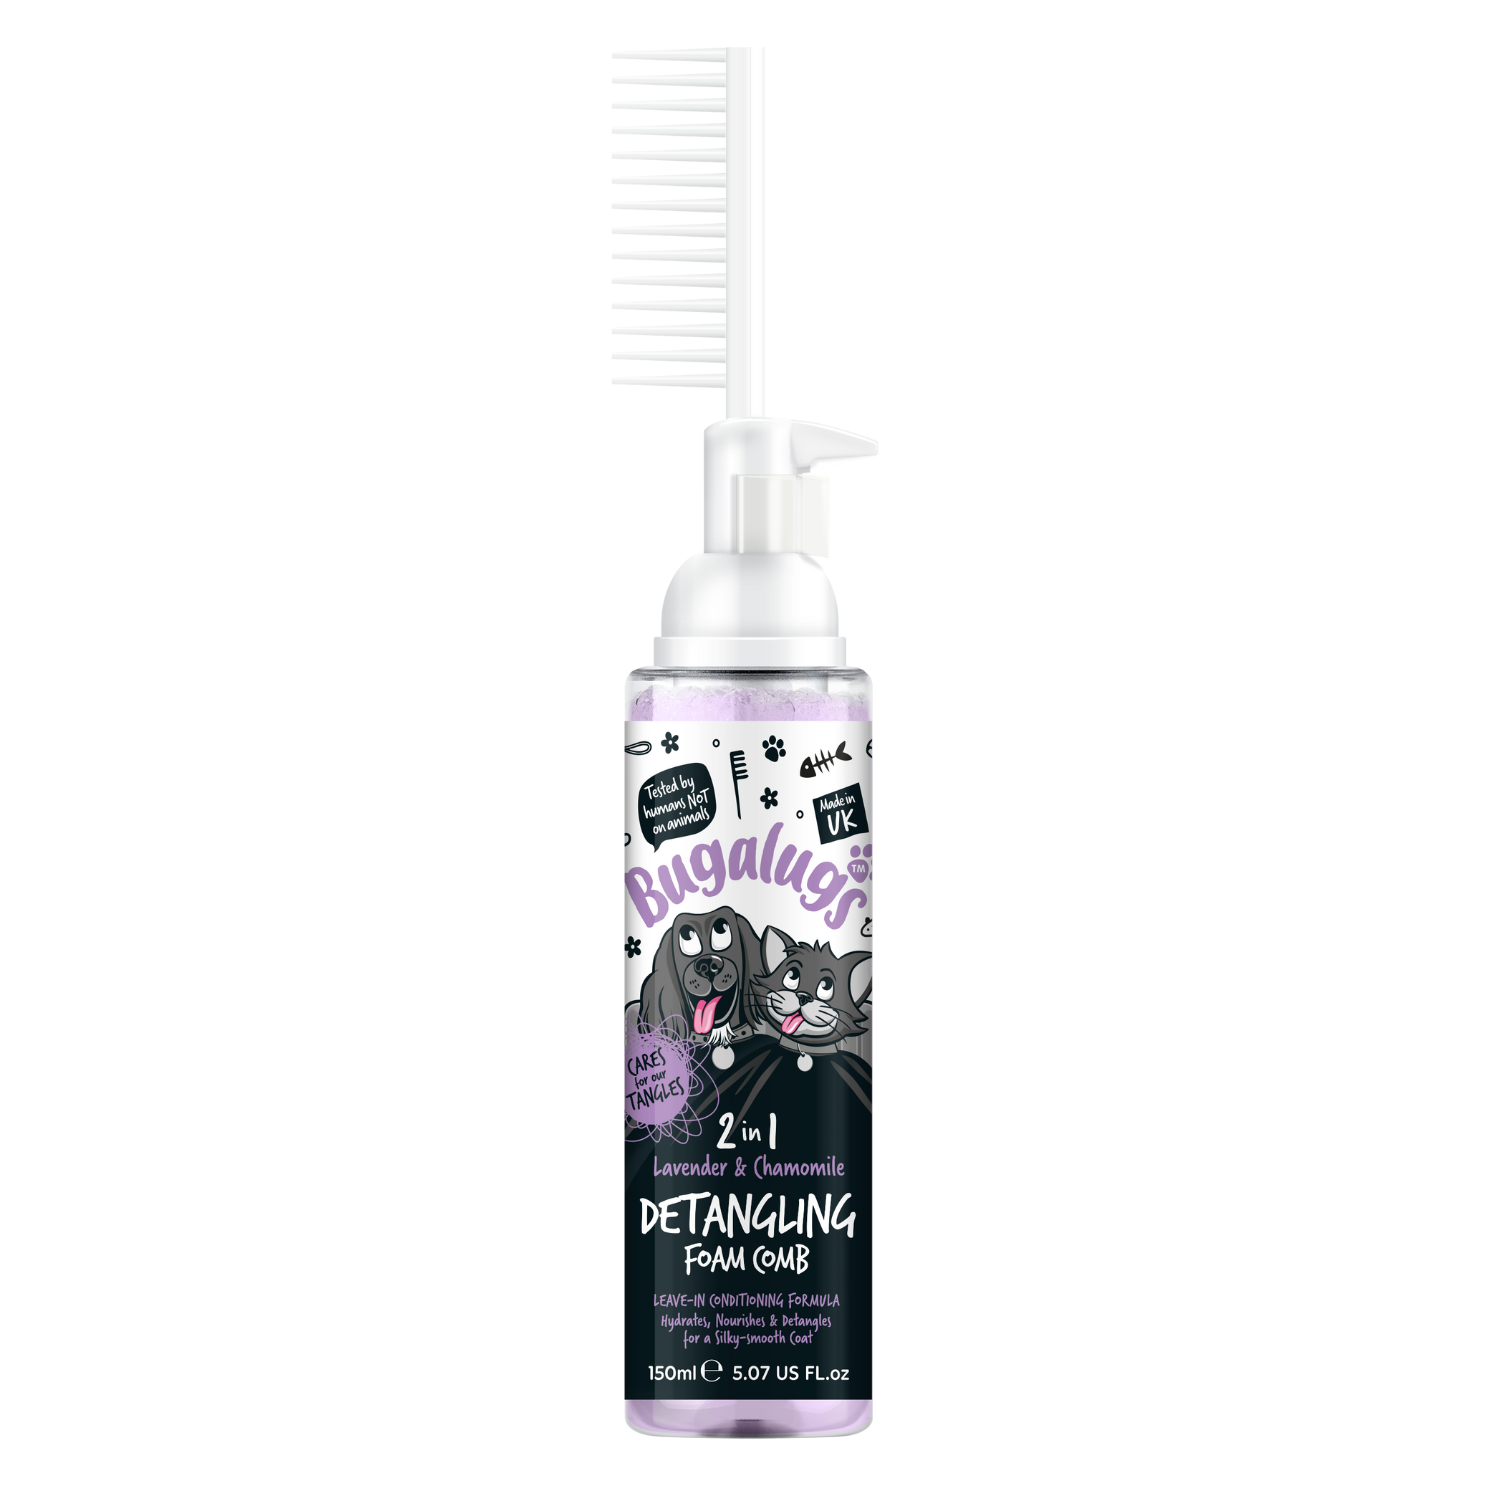 Bugalugs 2-in-1 Lavender and Chamomile Detangling Foam Comb with Leave-in Conditioner for Dogs and Cats